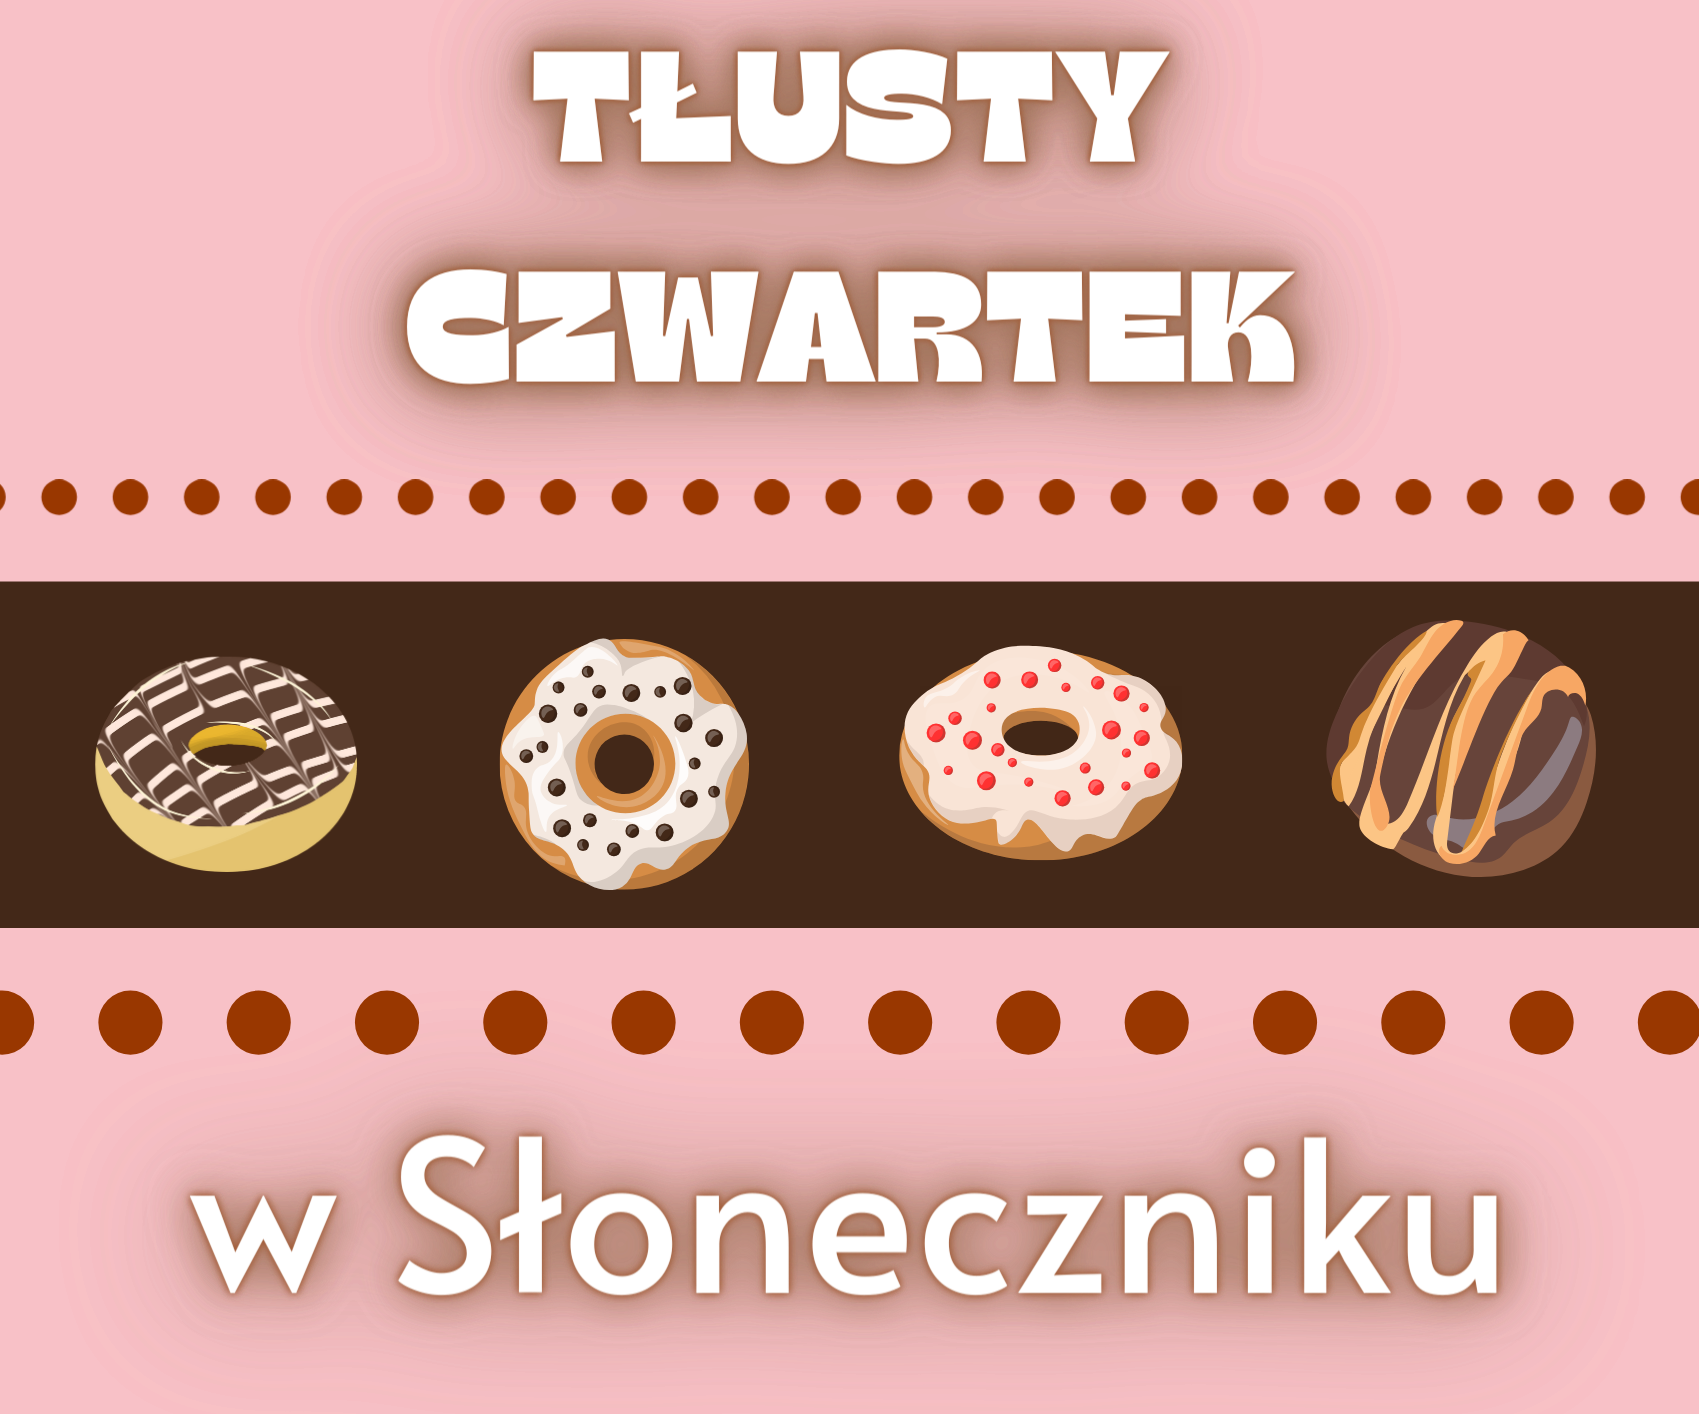 You are currently viewing Tłusty czwartek